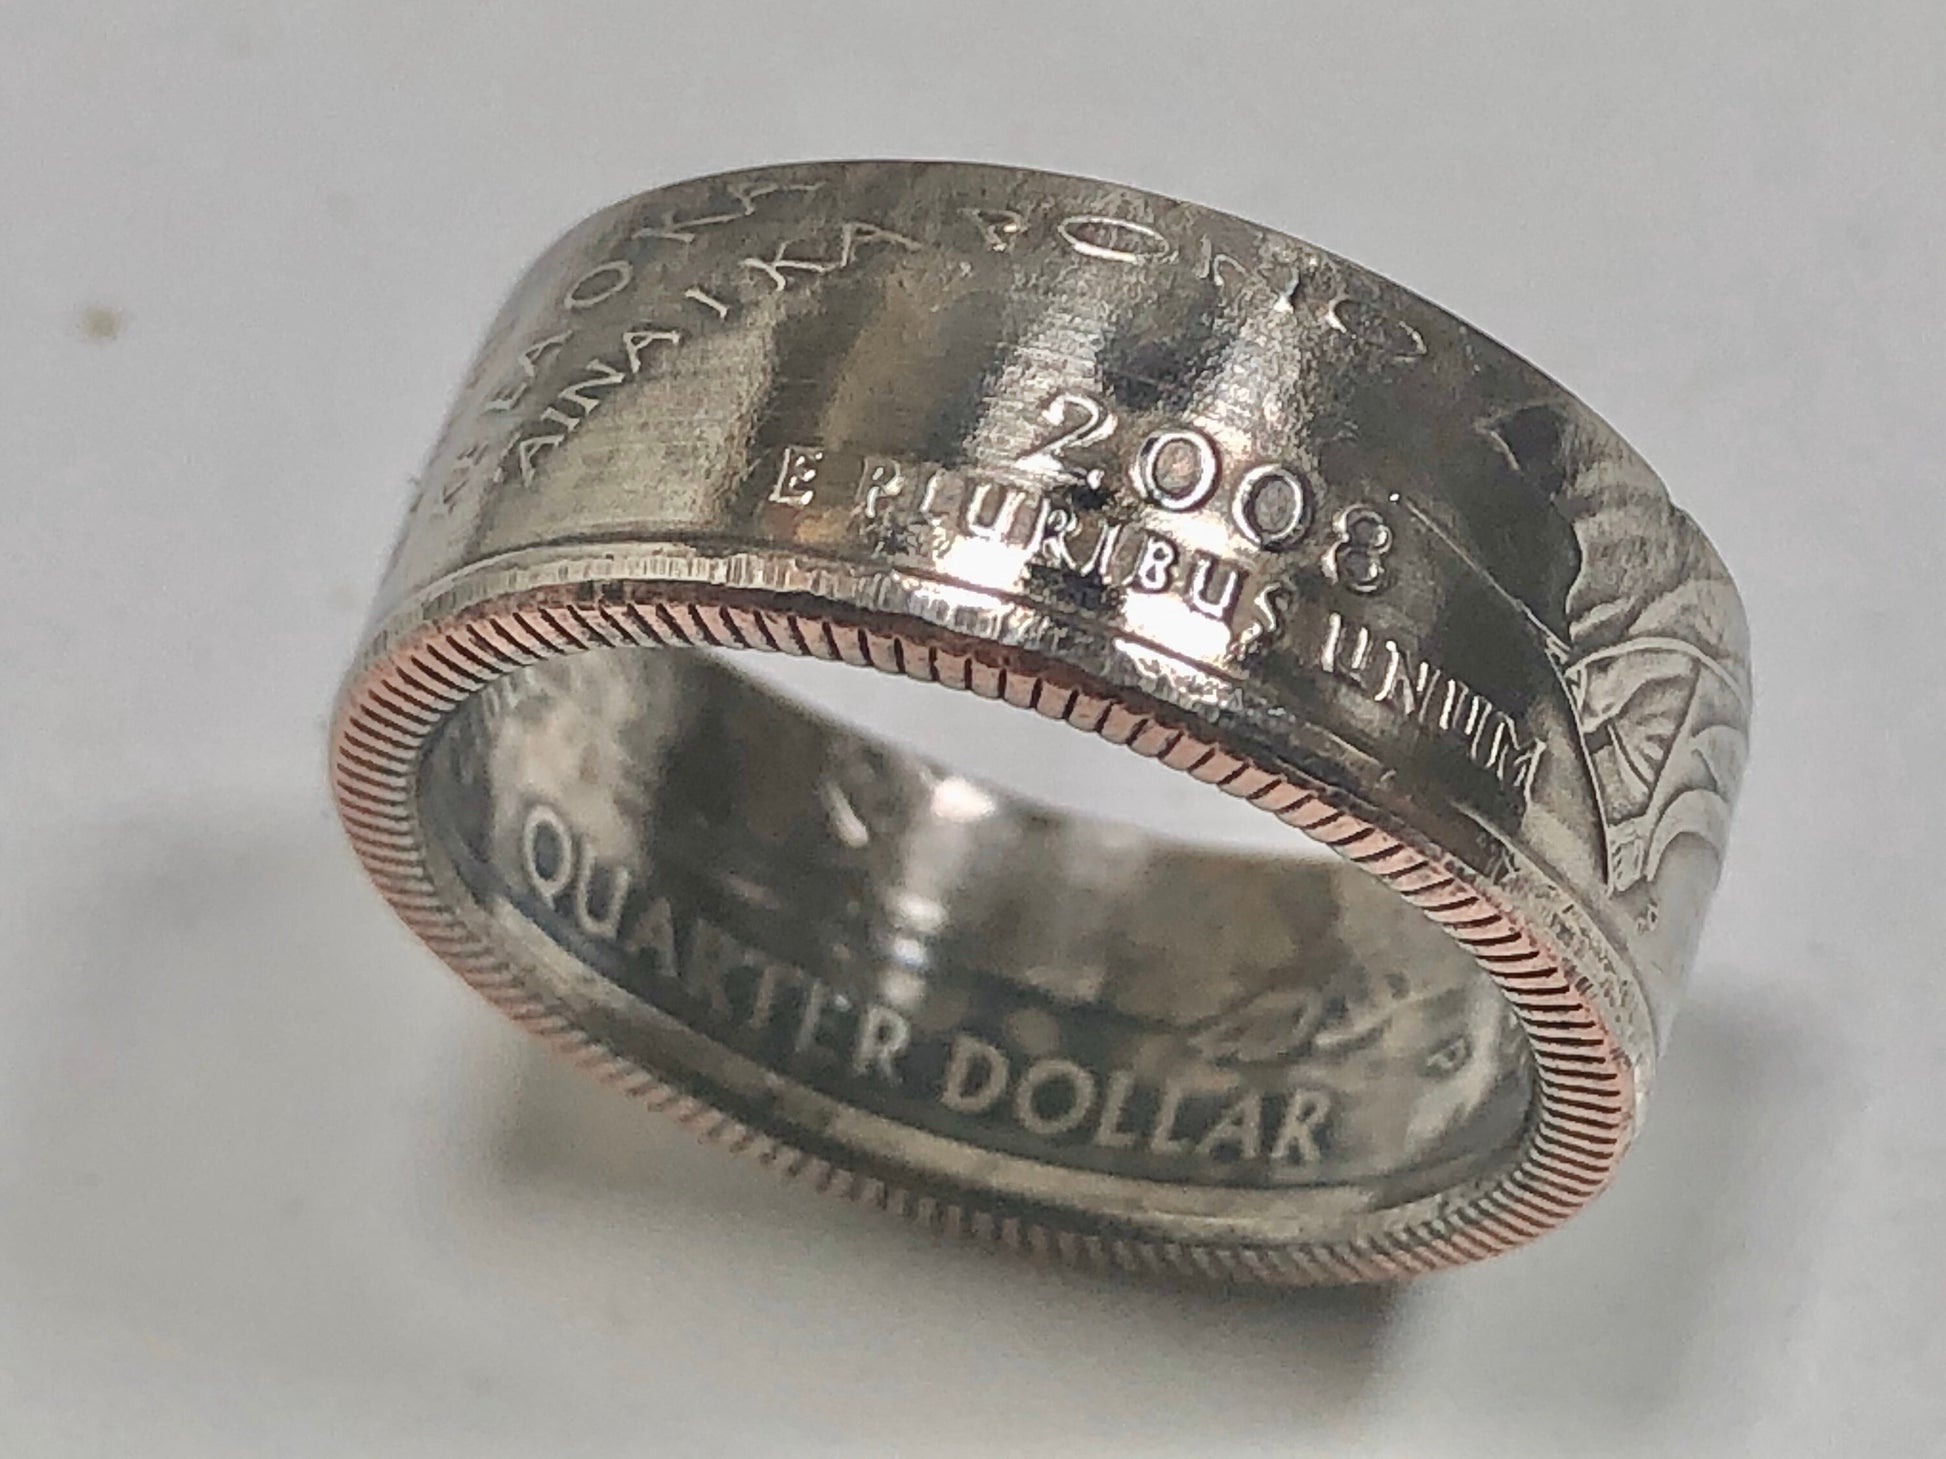 Hawaii Ring State Quarter Coin Ring Hand Made